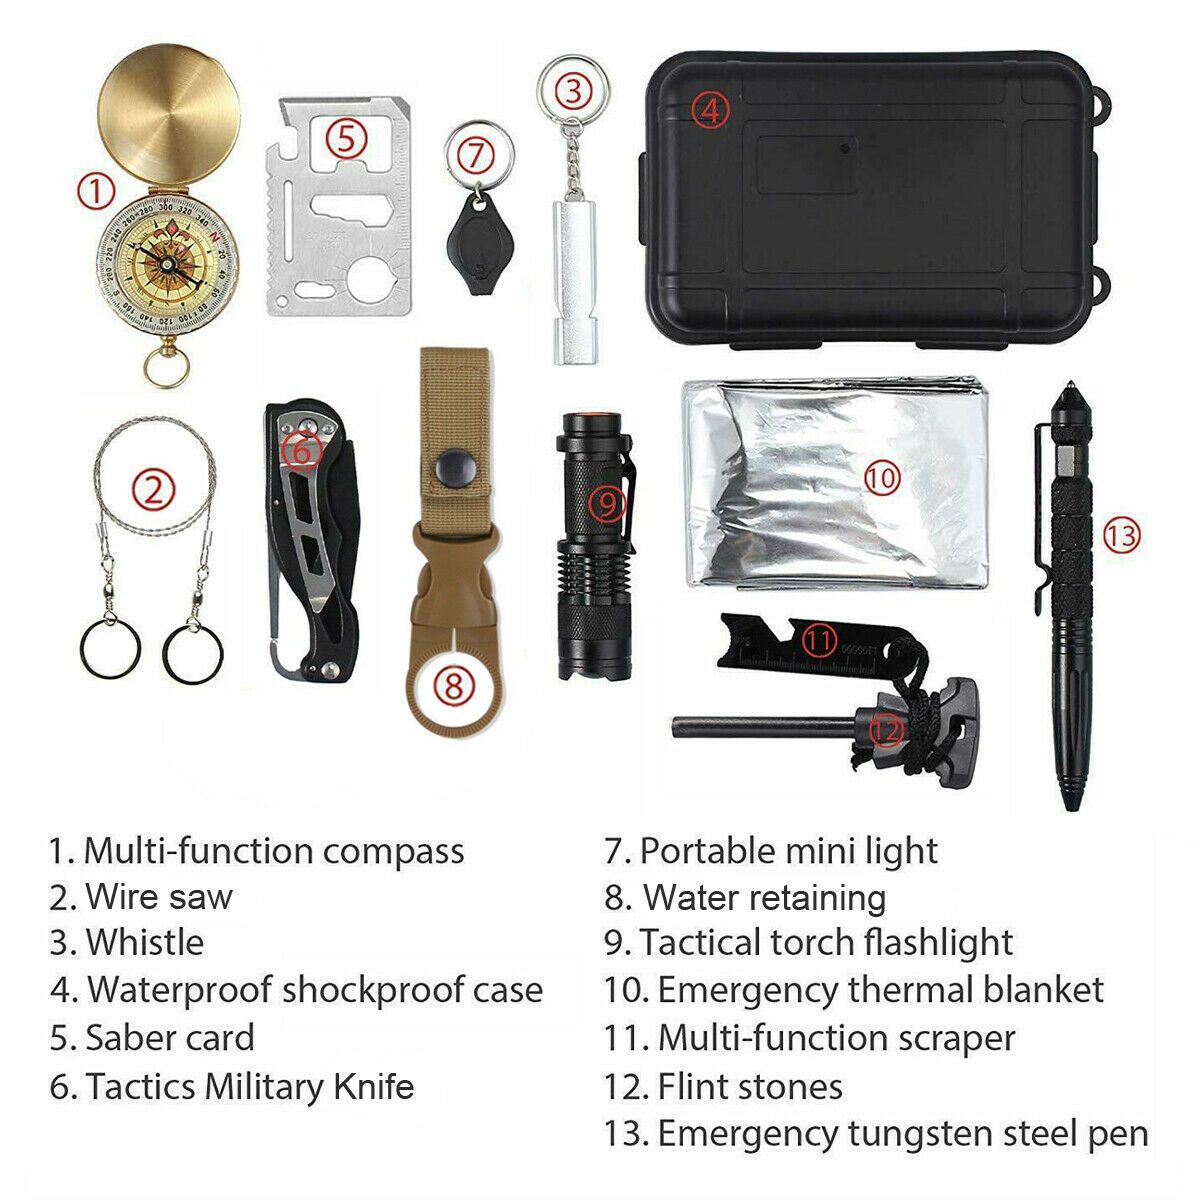 Survival Gear Clearance Specials at The Key to Survival